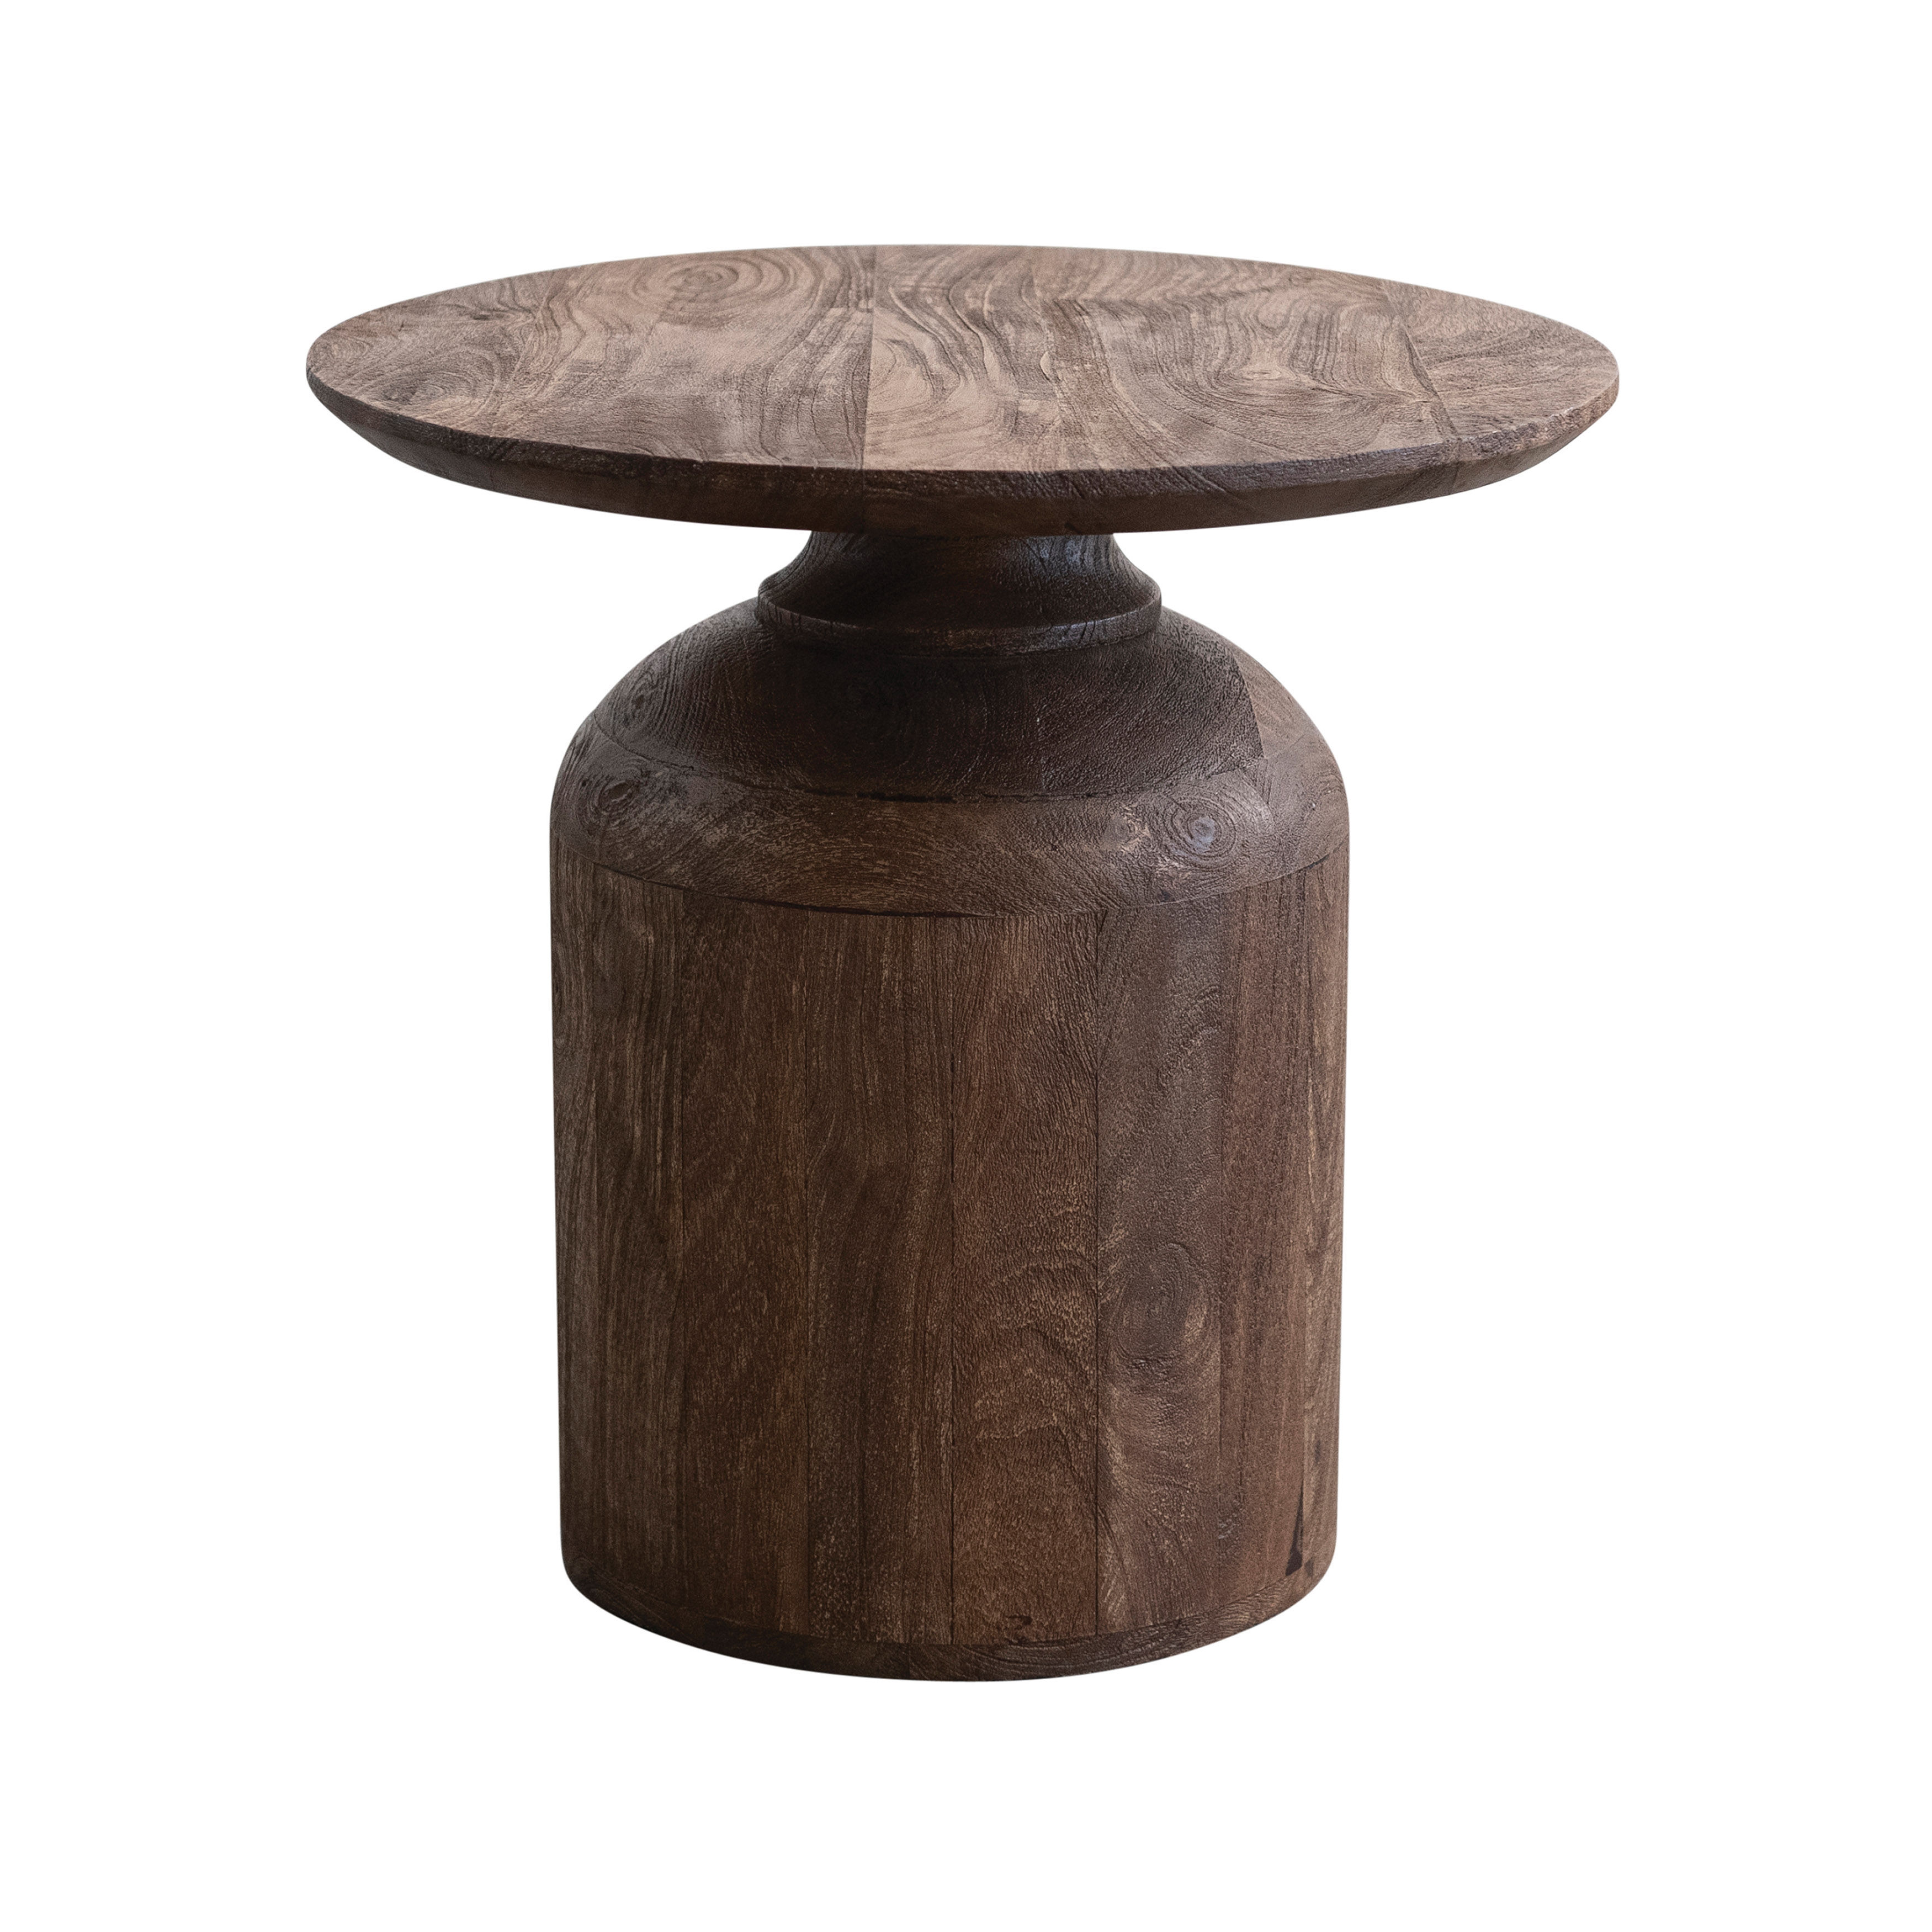 Mango Wood Side Table with Stained Finish, Brown - Image 0